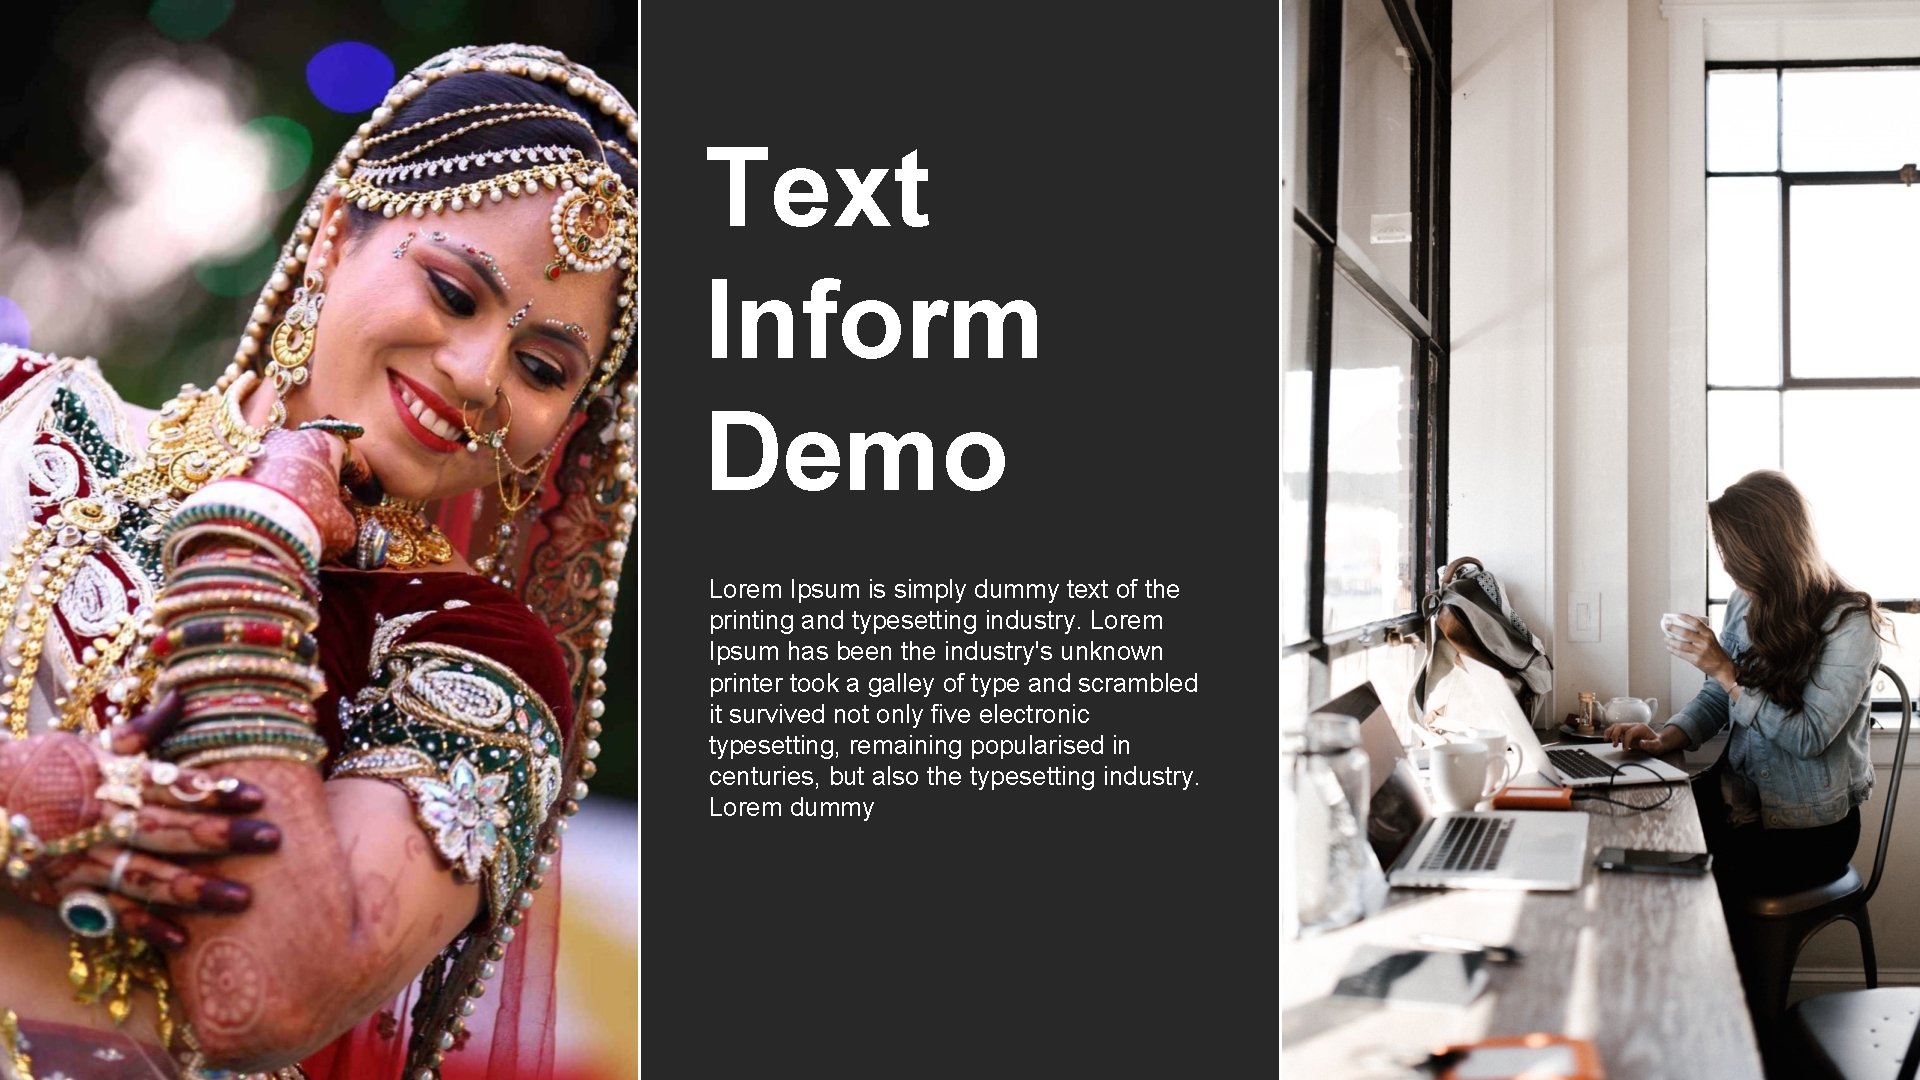 Text Inform Demo Lorem Ipsum is simply dummy text of the printing and typesetting